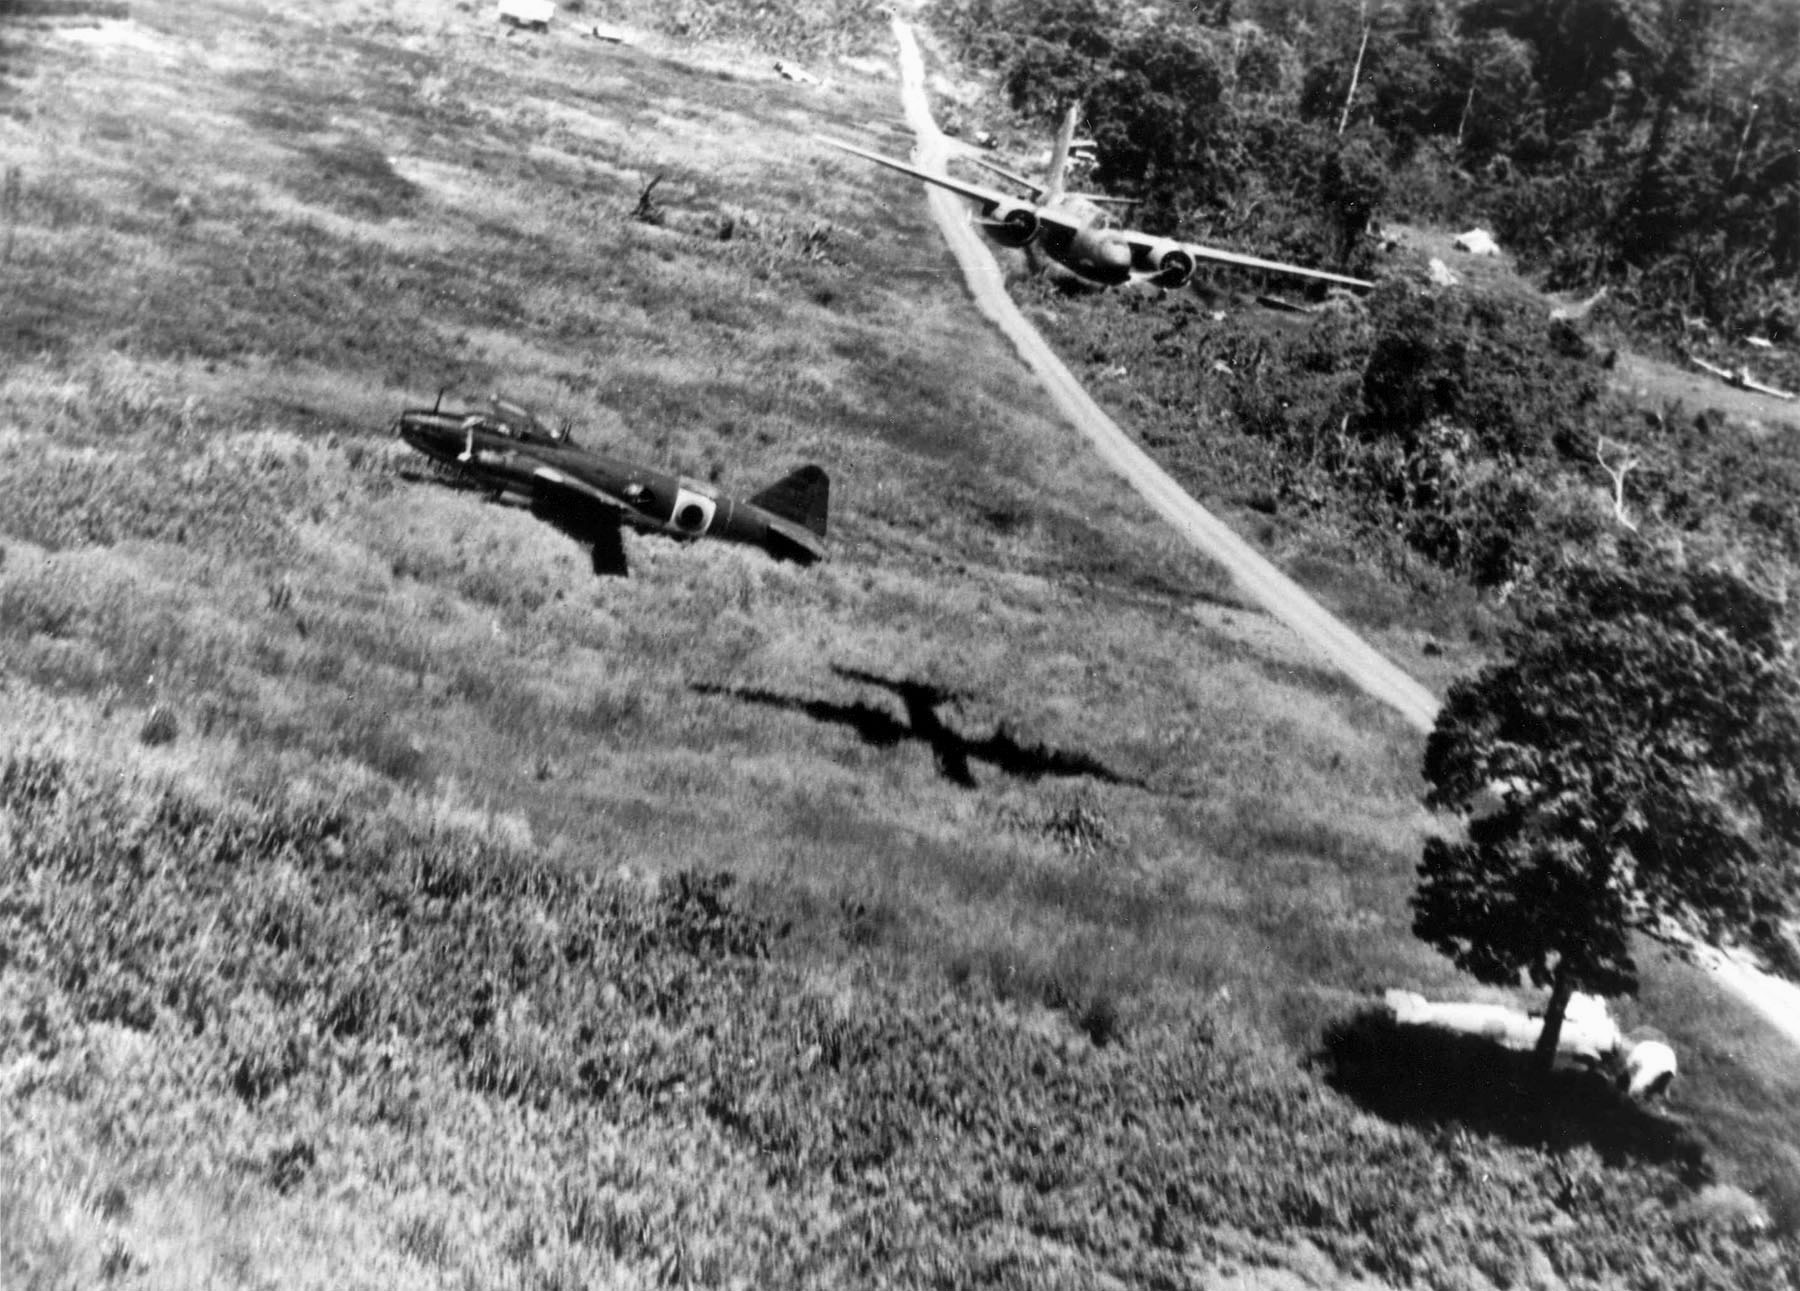 Attacking the Japanese airfield at Lae, New Guinea, this Douglas A-20 Havoc bomber flies low over enemy aircraft parked in the open.